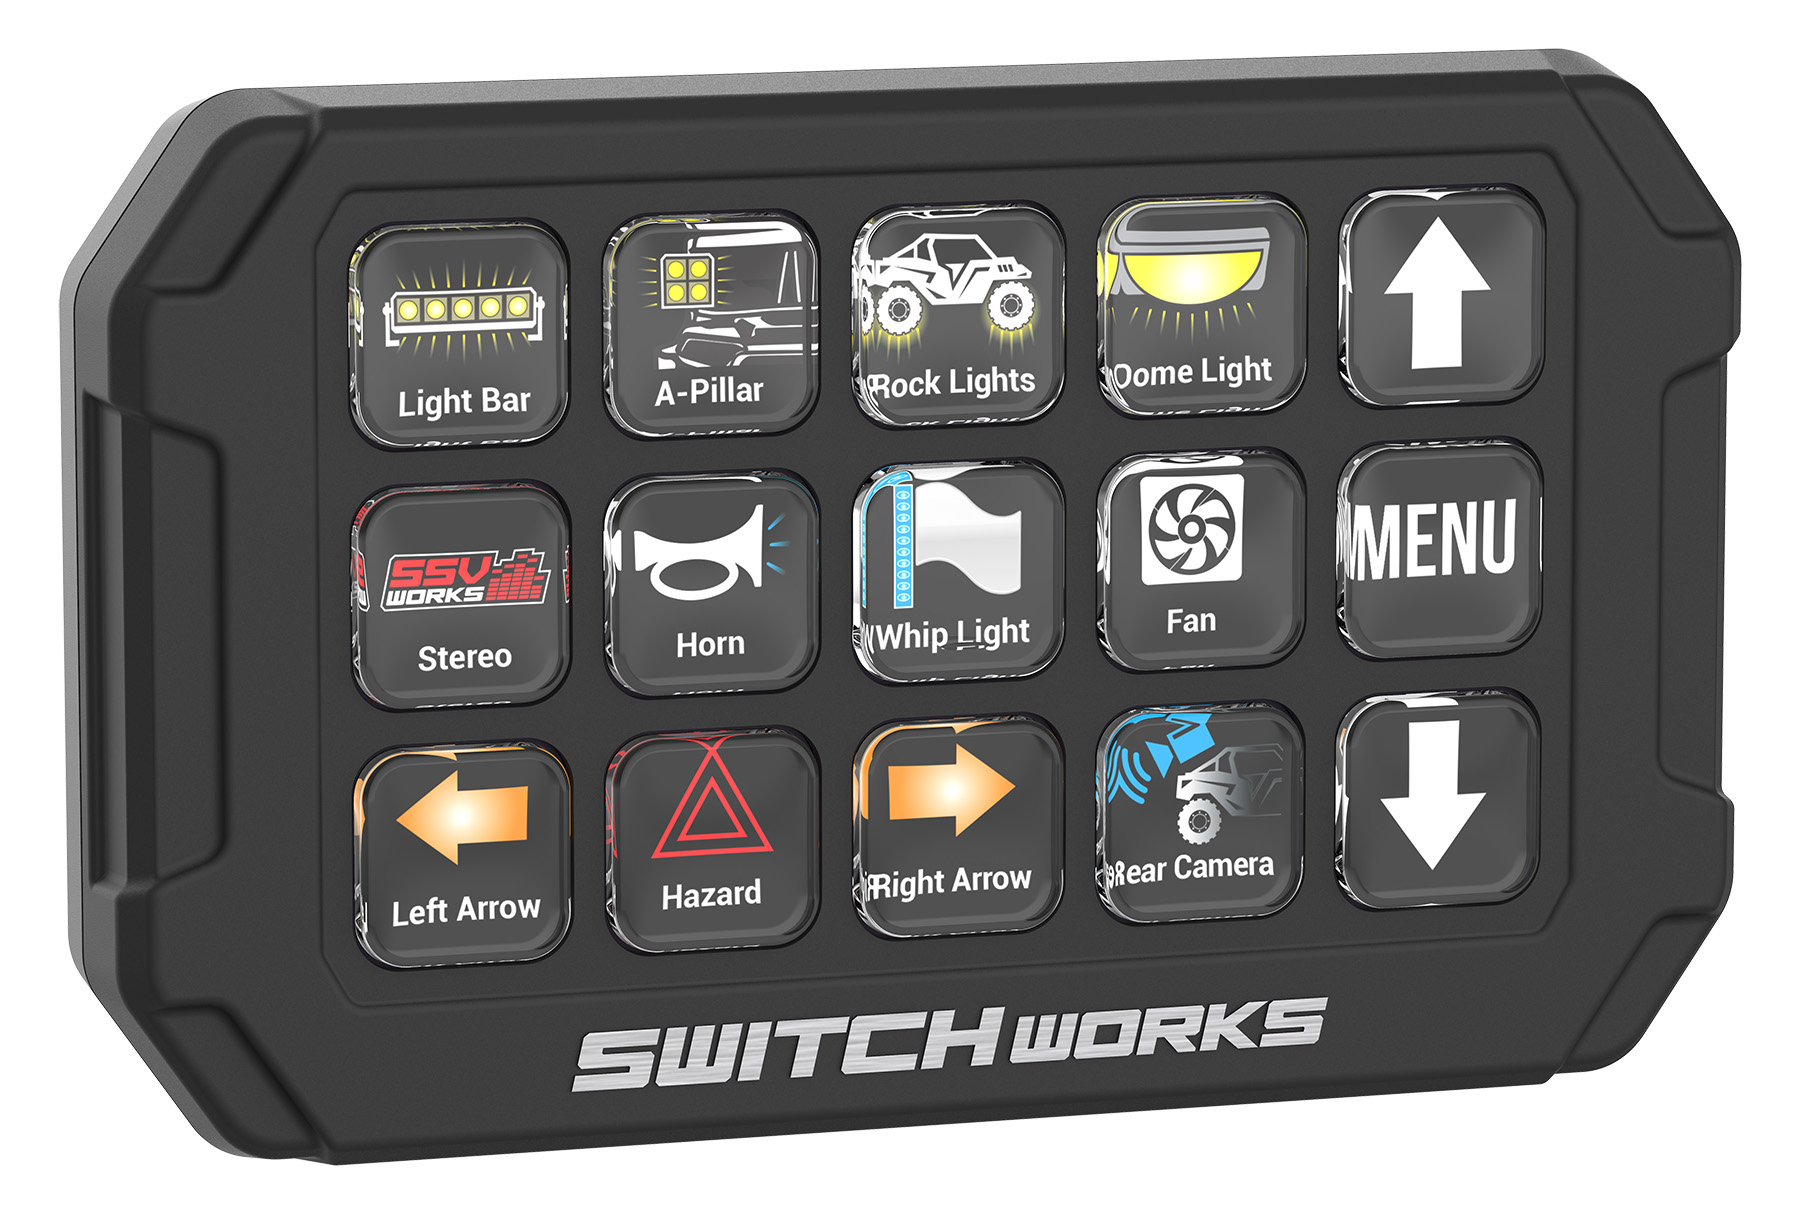 SW-E12 Electronic Smart Switcher